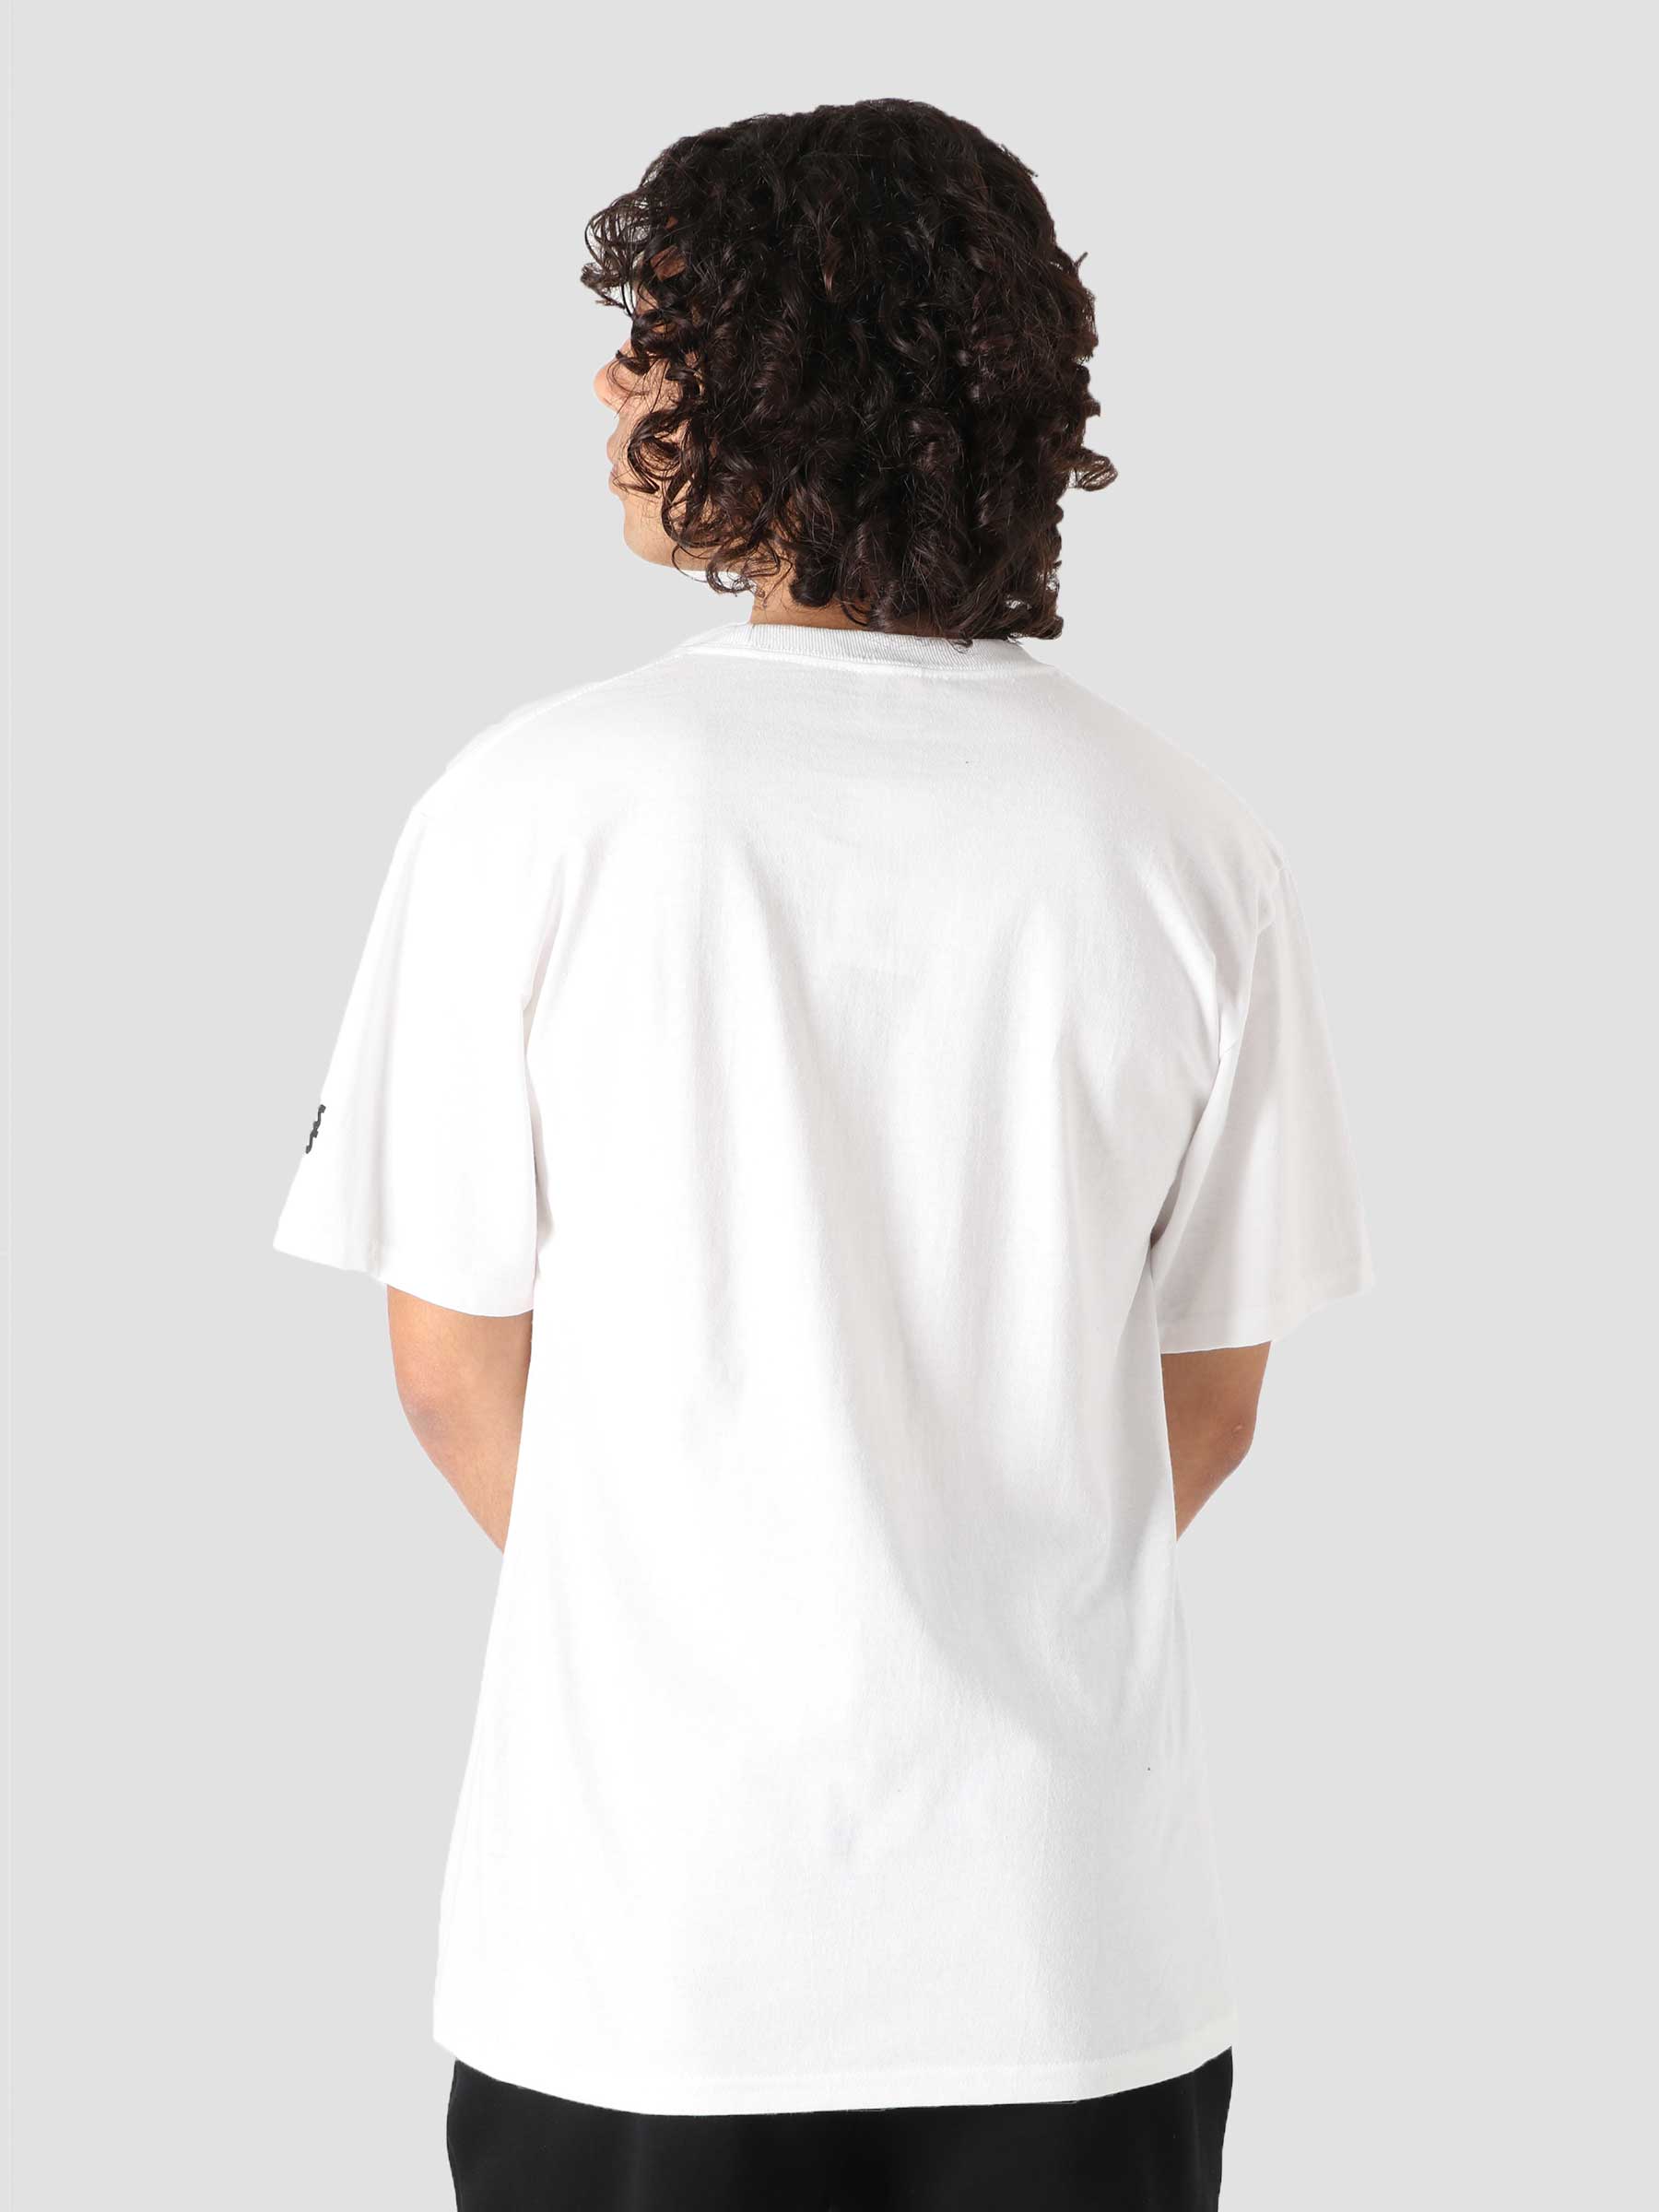 Directions S/S Tee White TS01765